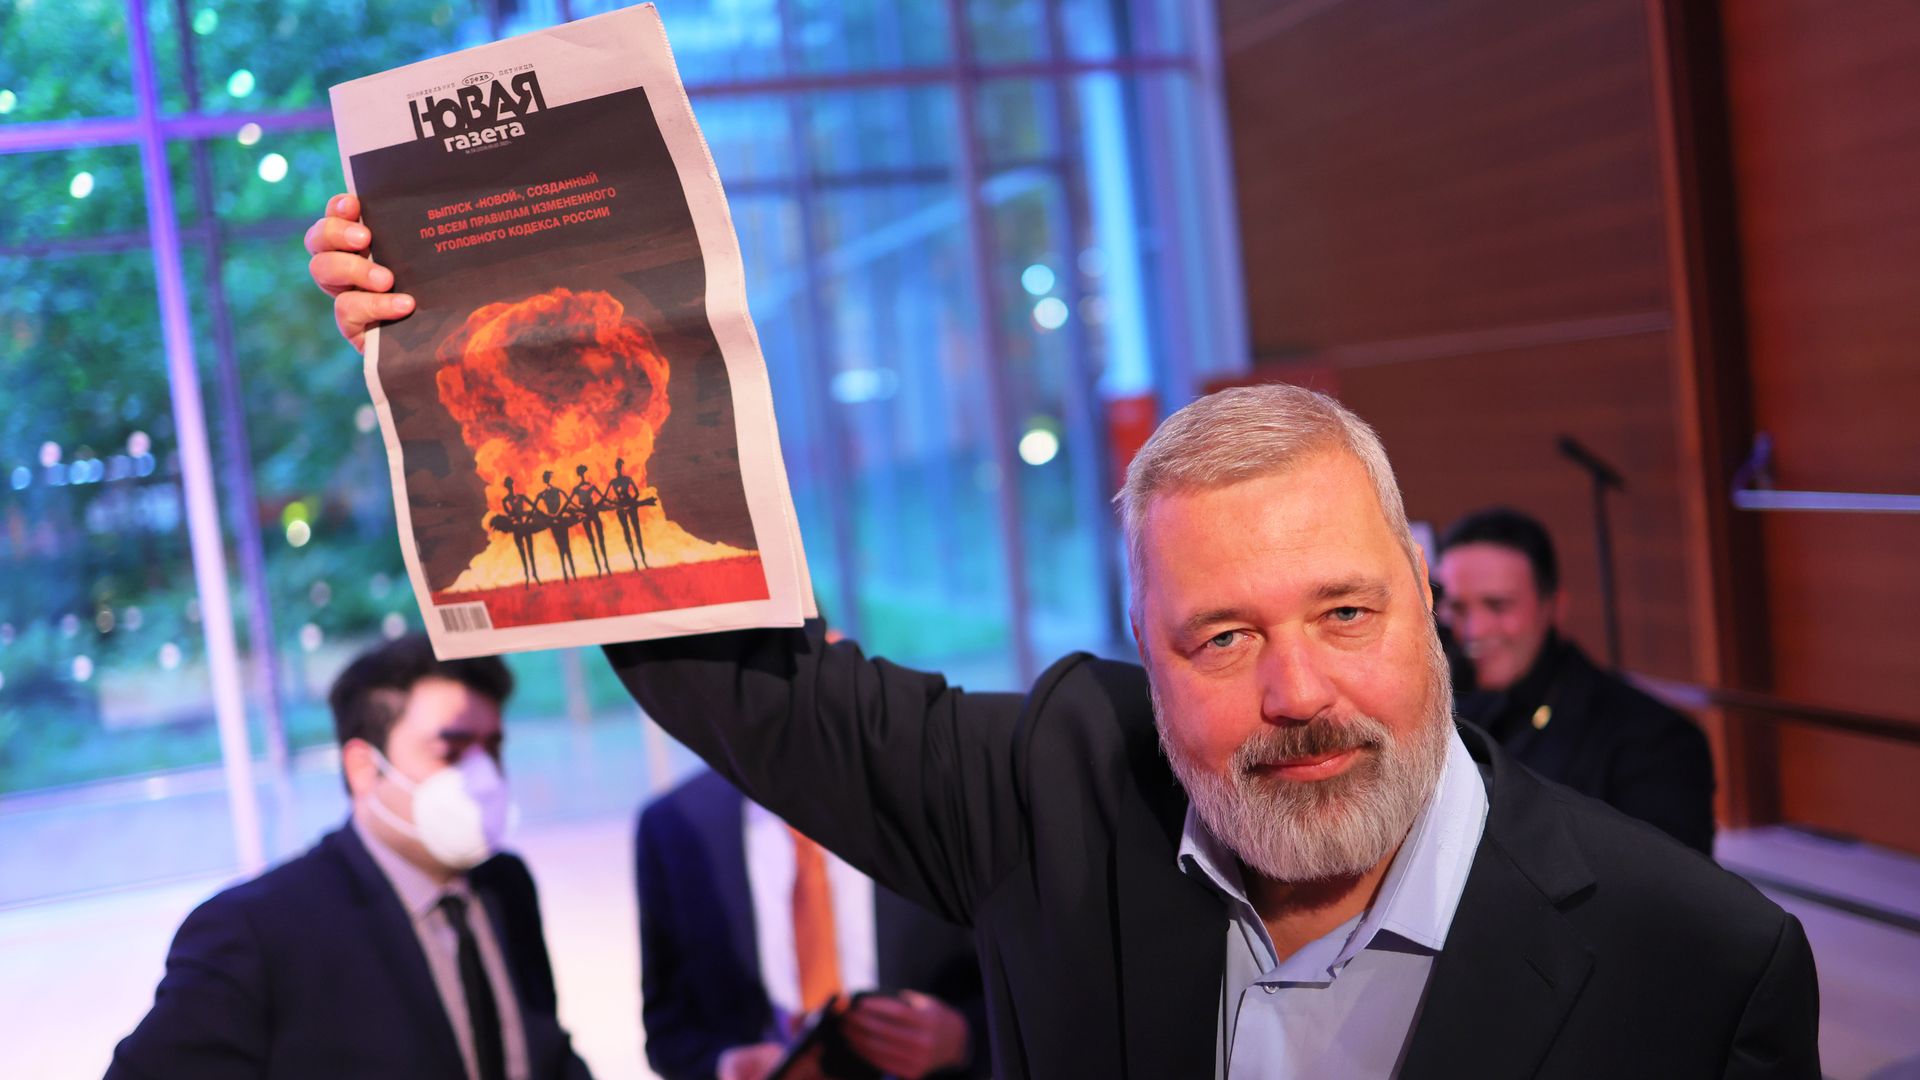 Nobel Peace Prize winner Dmitry Muratov holds up a copy of his Russian newspaper Novaya Gazeta fter the conclusion of a charity auction on June 20 in New York City. 